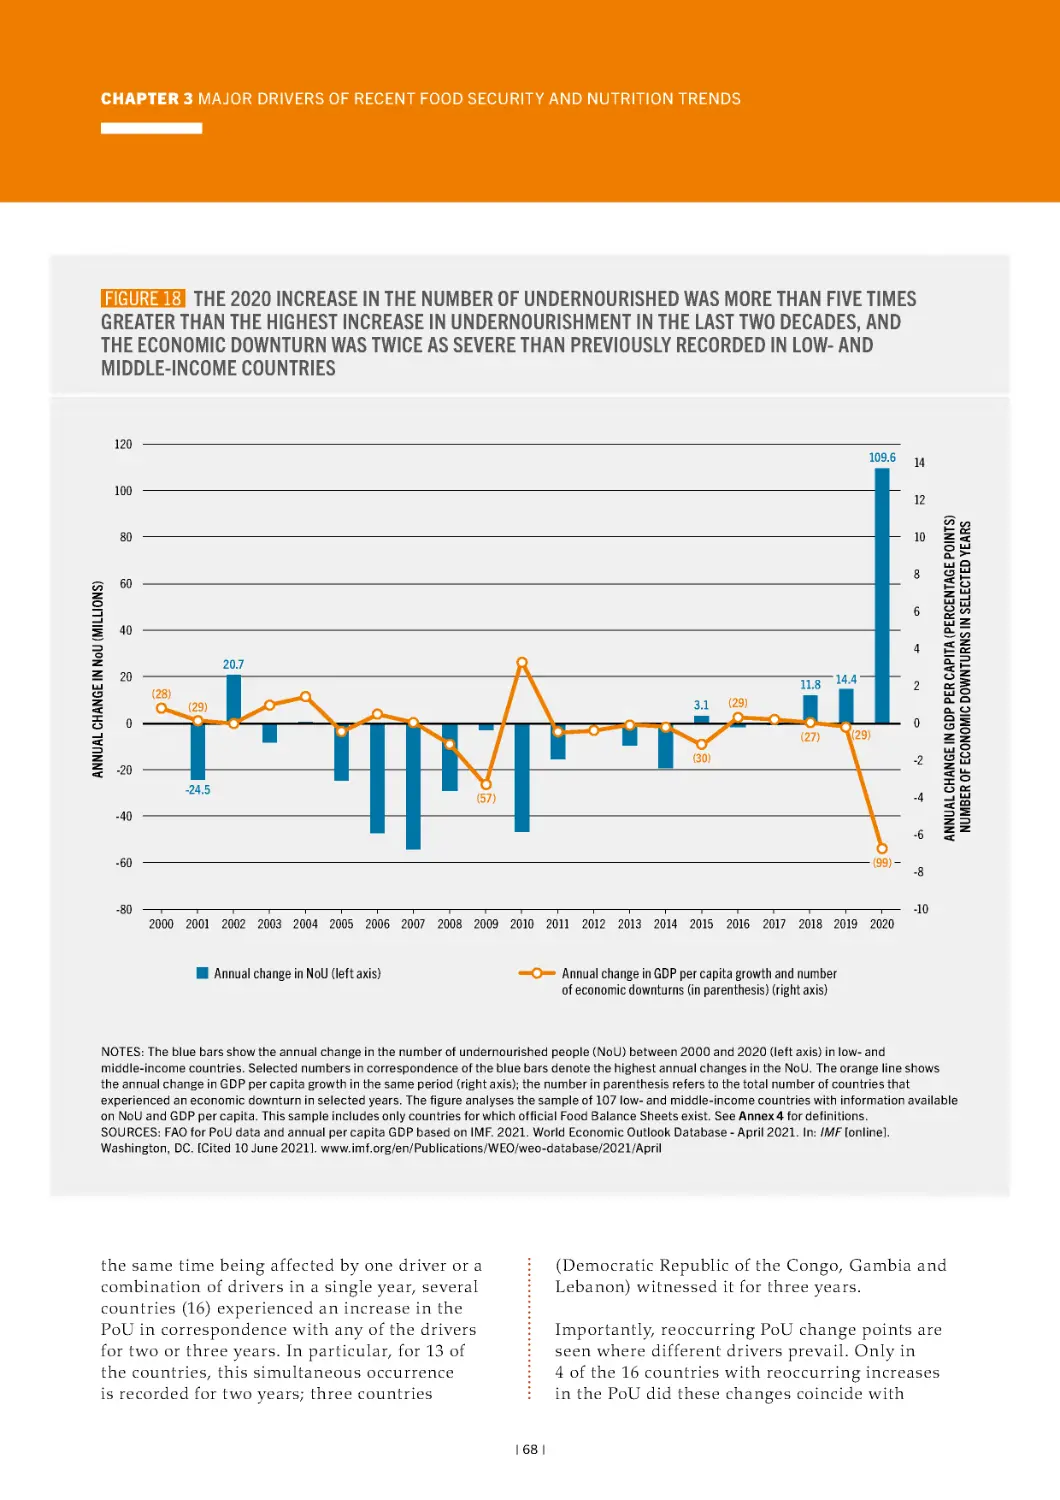 ﻿ figure 18   The 2020 increase in the number of undernourished was more than five times greater, than the highest increase in undernourishment in the last two decades, and the economic downturn was twice as severe, than previously recorded in low- and mi